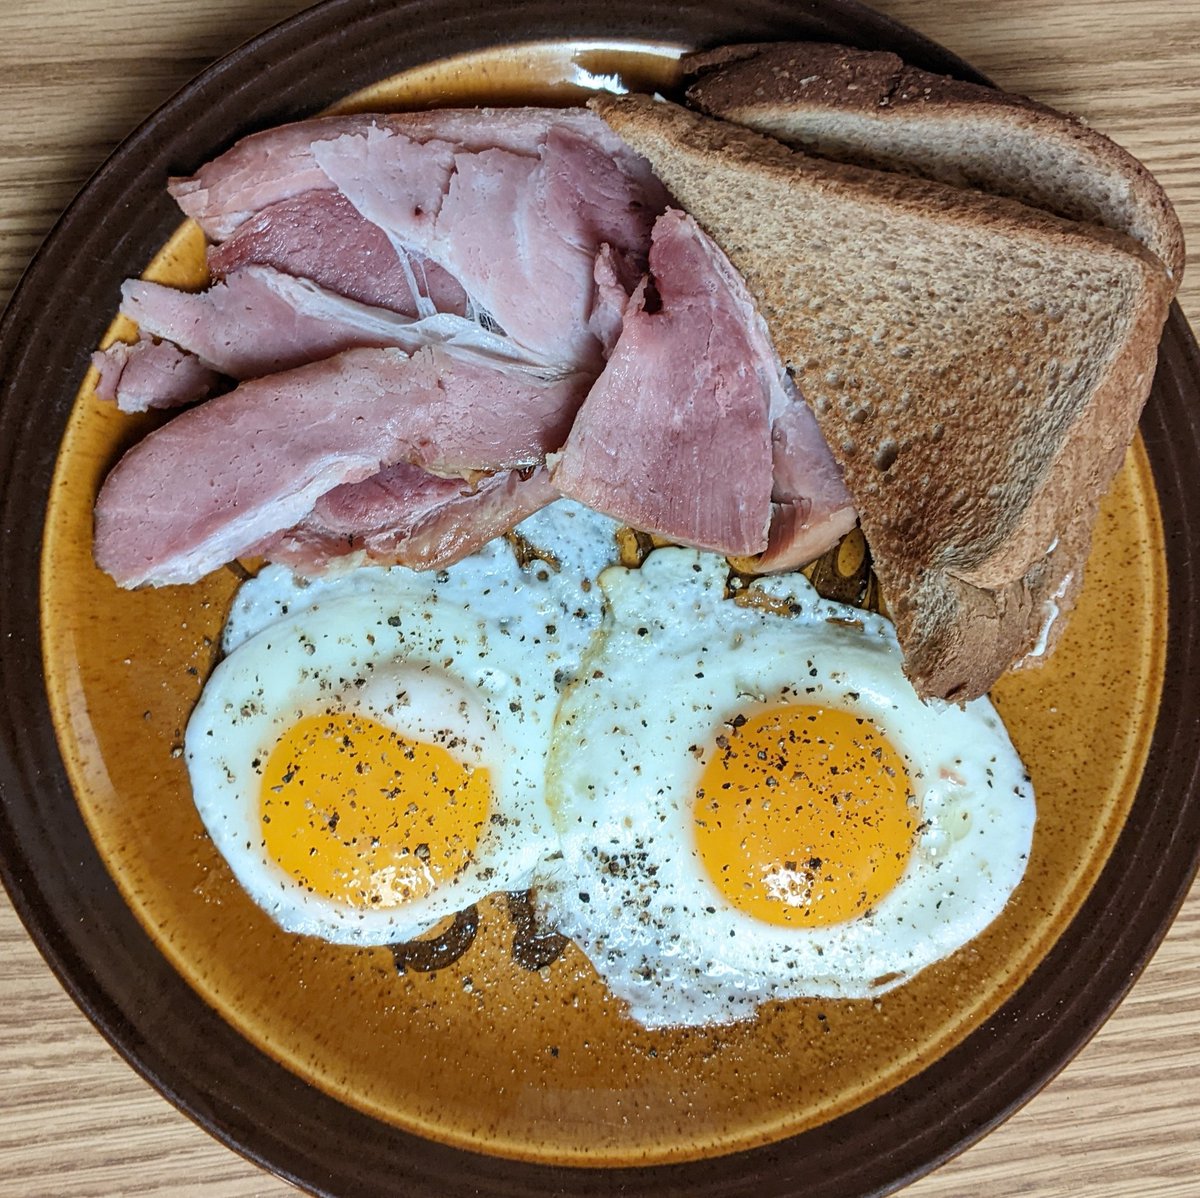 Two Eggs - Sunny-Side Up, Baked Ham and Wheat Toast 

#allkindsofrecipes #testkitchen #twoeggssunnysideup #twoeggs #friedeggs #sunnysideup #sunnysideupeggs #ham #hamandeggs #hameggsandtoast #toast #wheattoast #breakfast